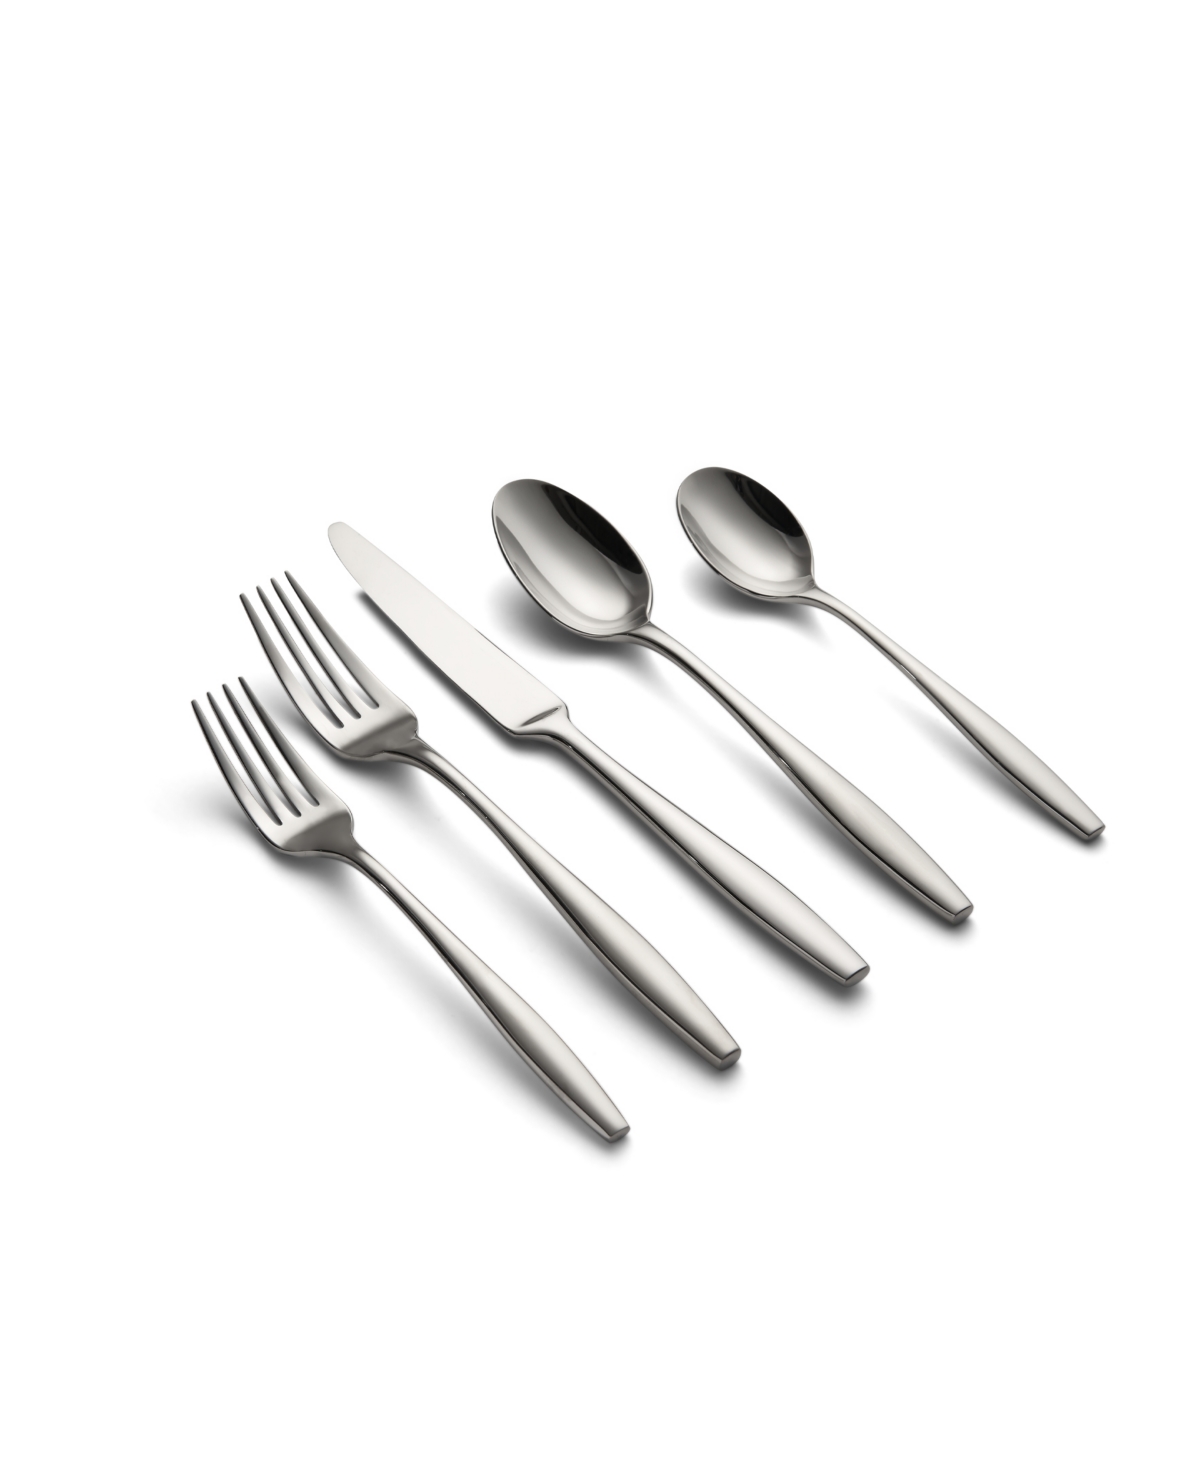 Cambridge Silversmiths Katerina Mirror 20 Piece 18/10 Stainless Steel Flatware Set, Service For 4 In Silver